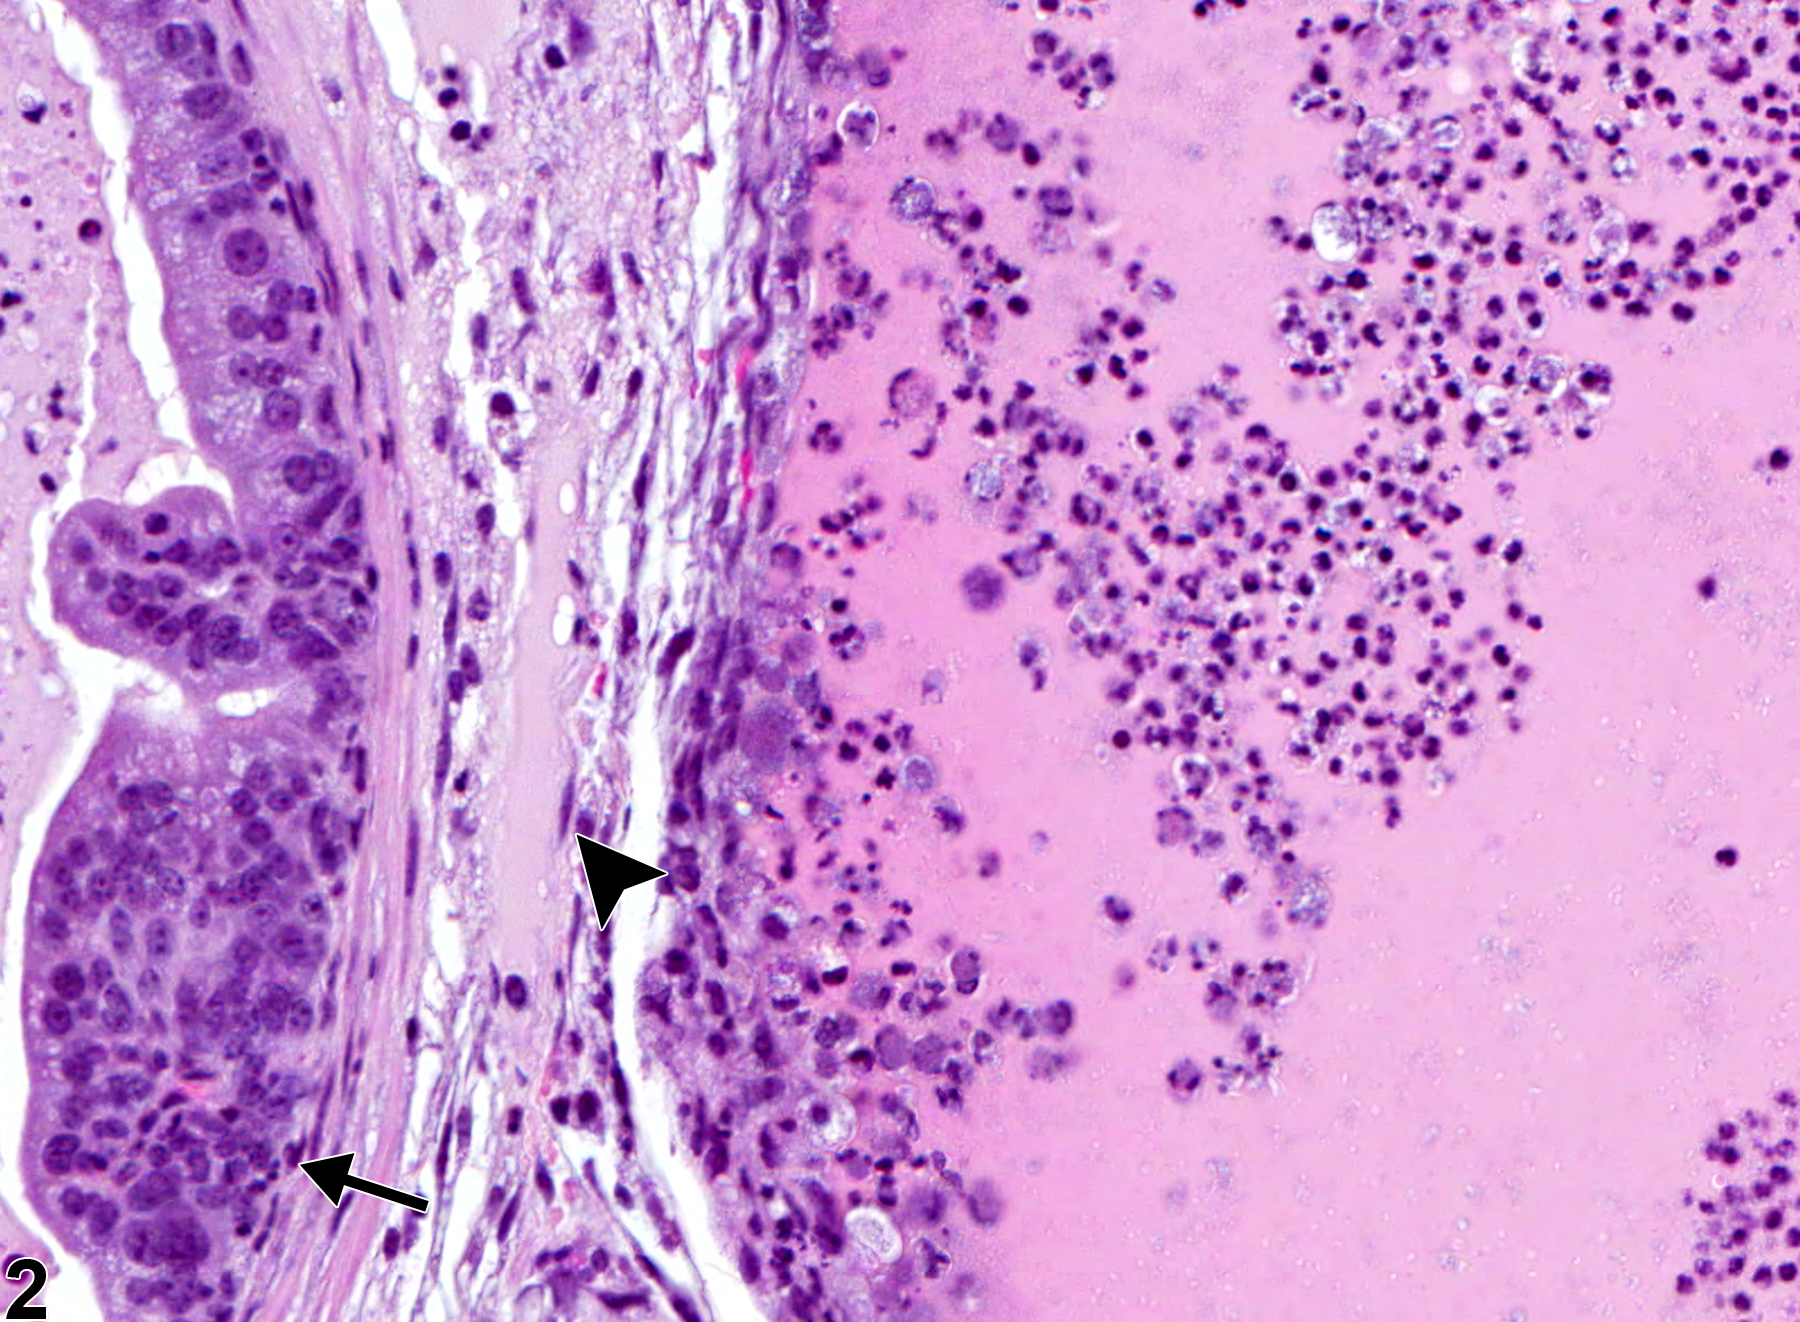 Image of inflammation in the seminal vesicle from a male B6C3F1 mouse in an chronic study